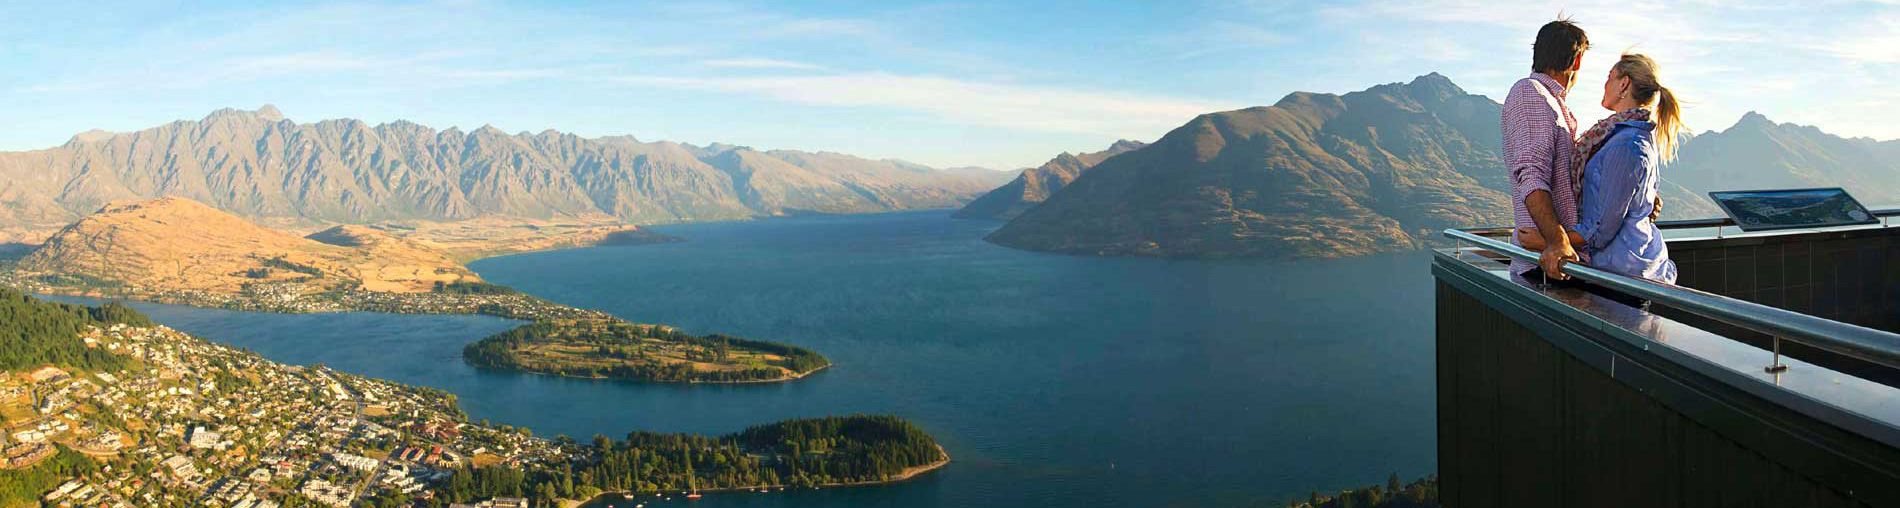 Affordable Holiday Tour Packages to New Zealand